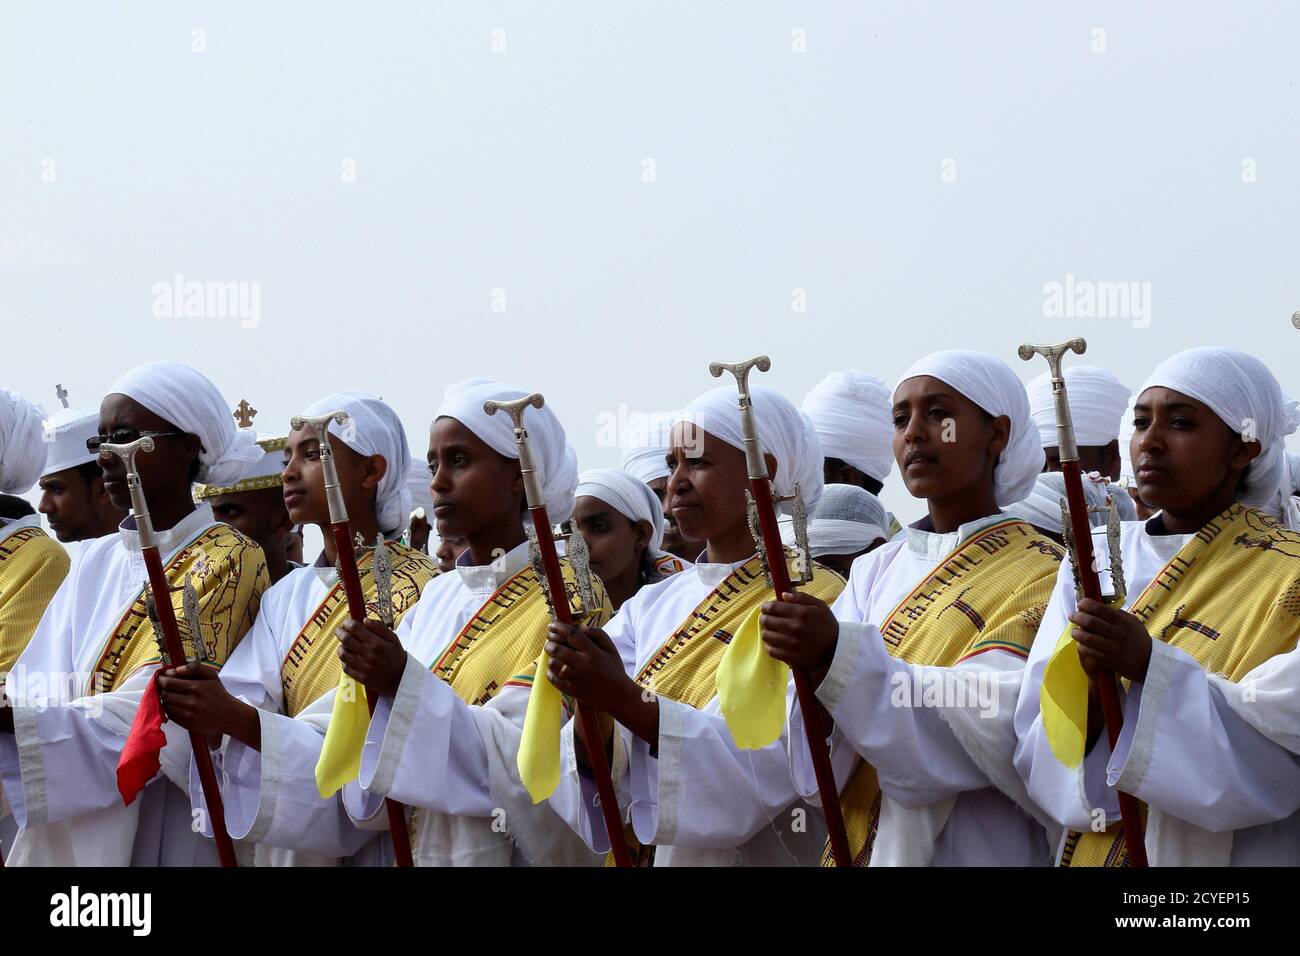 Ethiopian Orthodox worshippers take part in the annual Epiphany celebrations called "Timket" in Addis Ababa January 19, 2015. "Timket" commemorates Jesus Christ's baptism in the Jordan River by John the Baptist. REUTERS/Tiksa Negeri (ETHIOPIA - Tags: RELIGION SOCIETY) Stock Photo